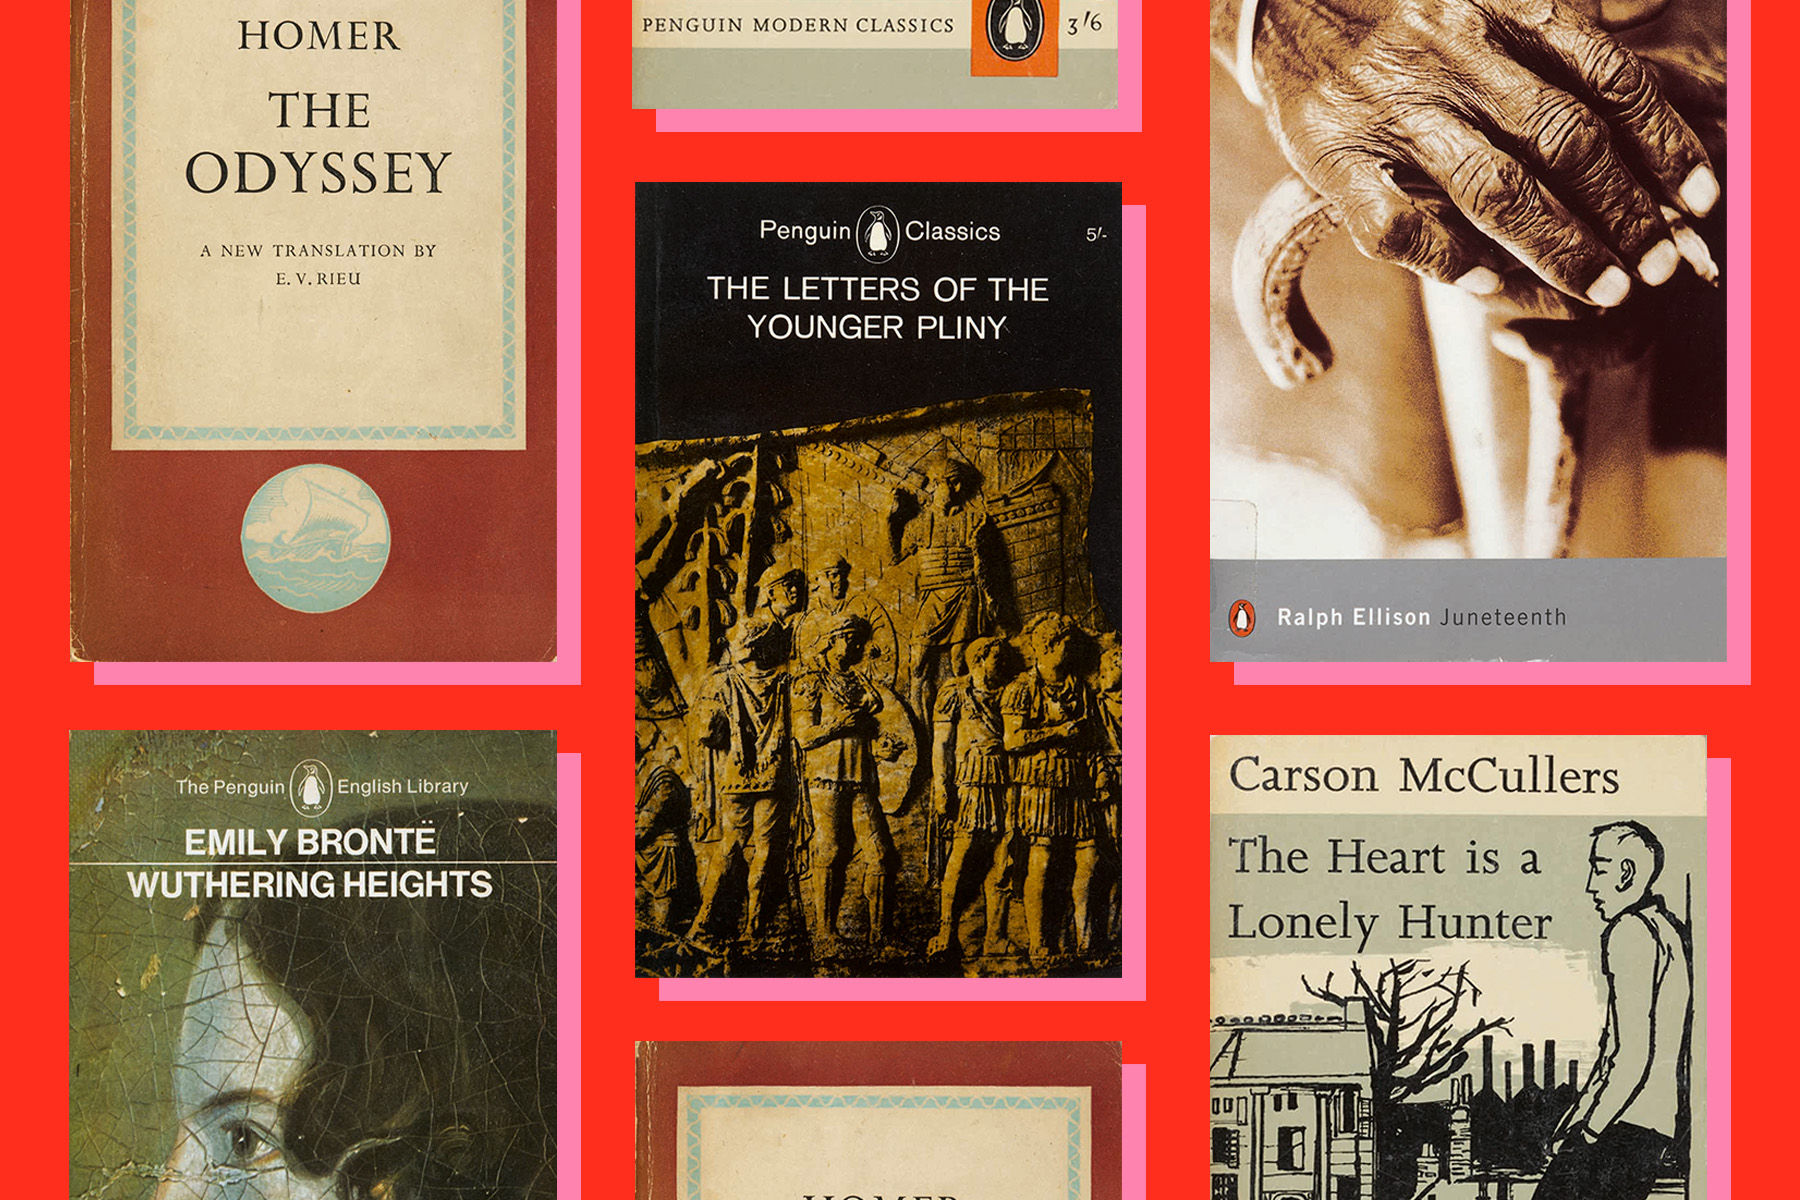 A flatlay of five Penguin Classics covers against a red background.